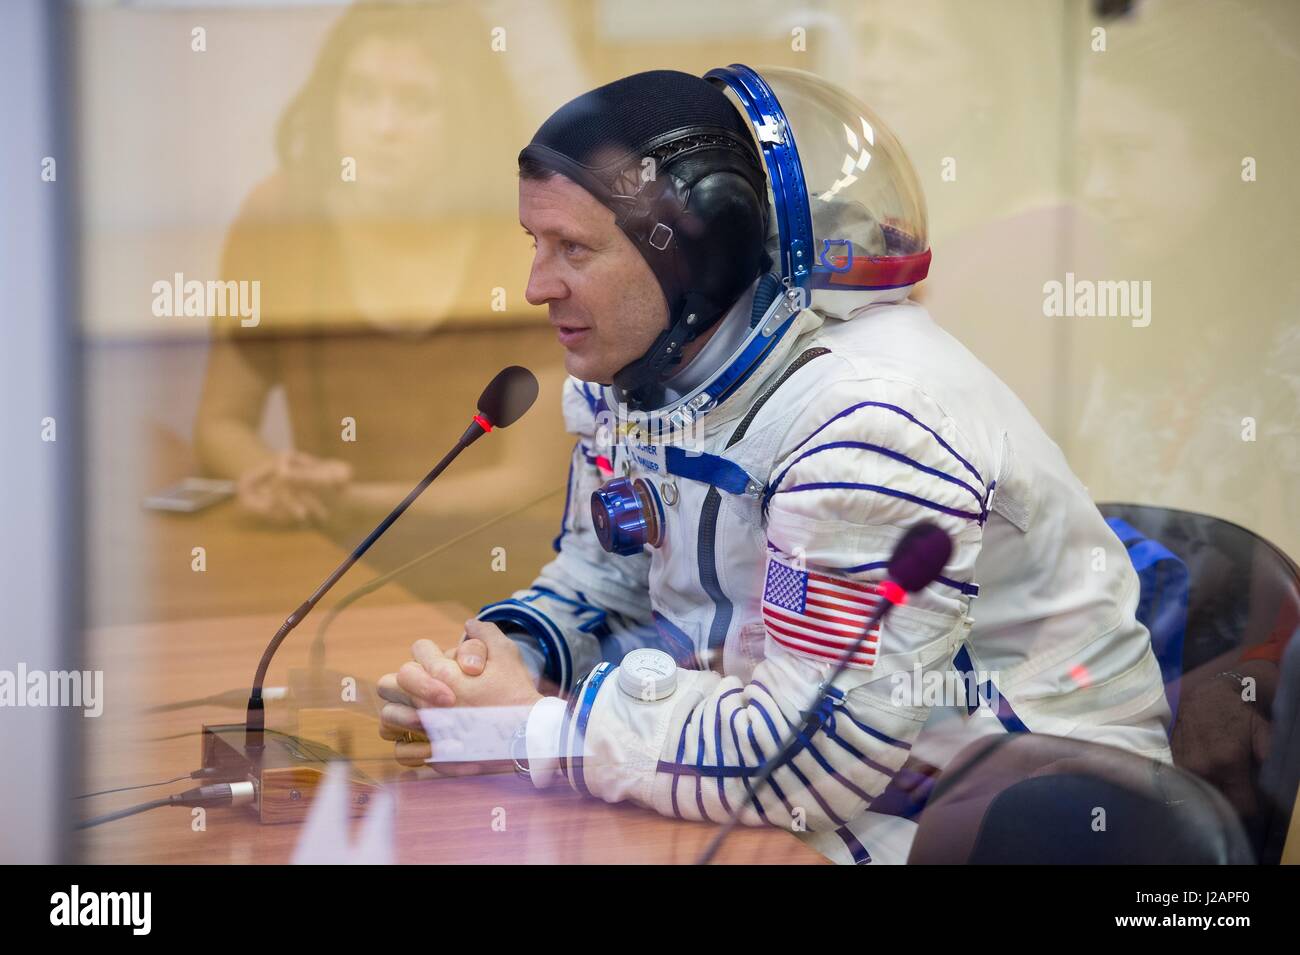 NASA International Space Station Expedition 51 prime crew member American astronaut Jack Fischer speaks with his family after having his Russian Sokol launch and entry spacesuit pressure-checked in preparation for the Soyuz MS-04 launch at the Baikonur Cosmodrome April 20, 2017 in Baikonur, Kazakhstan.     (photo by Aubrey Gemignani /NASA  via Planetpix) Stock Photo